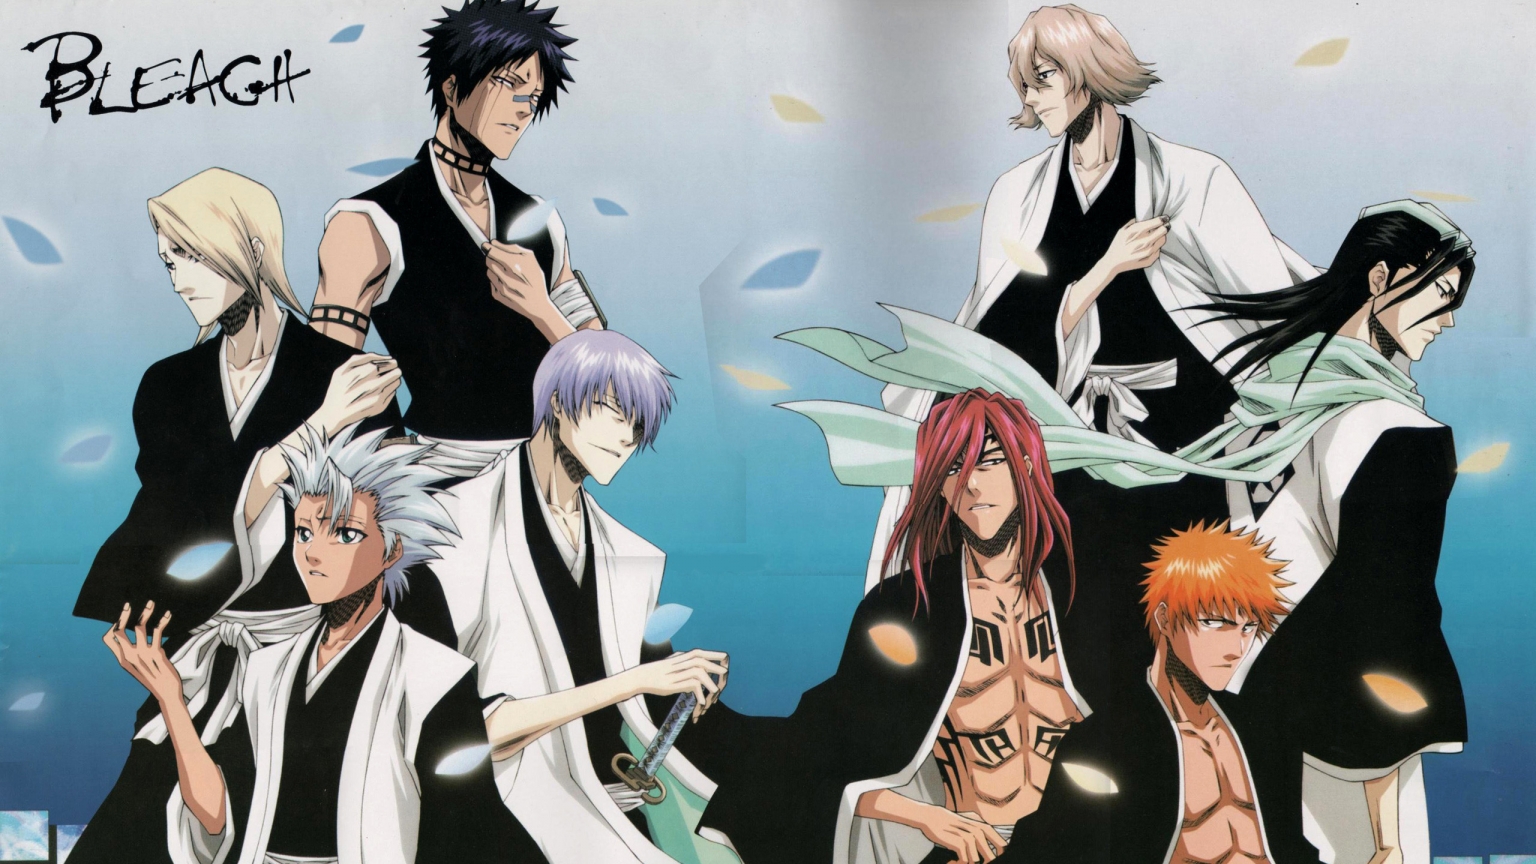 Bleach Anime Characters for 1536 x 864 HDTV resolution